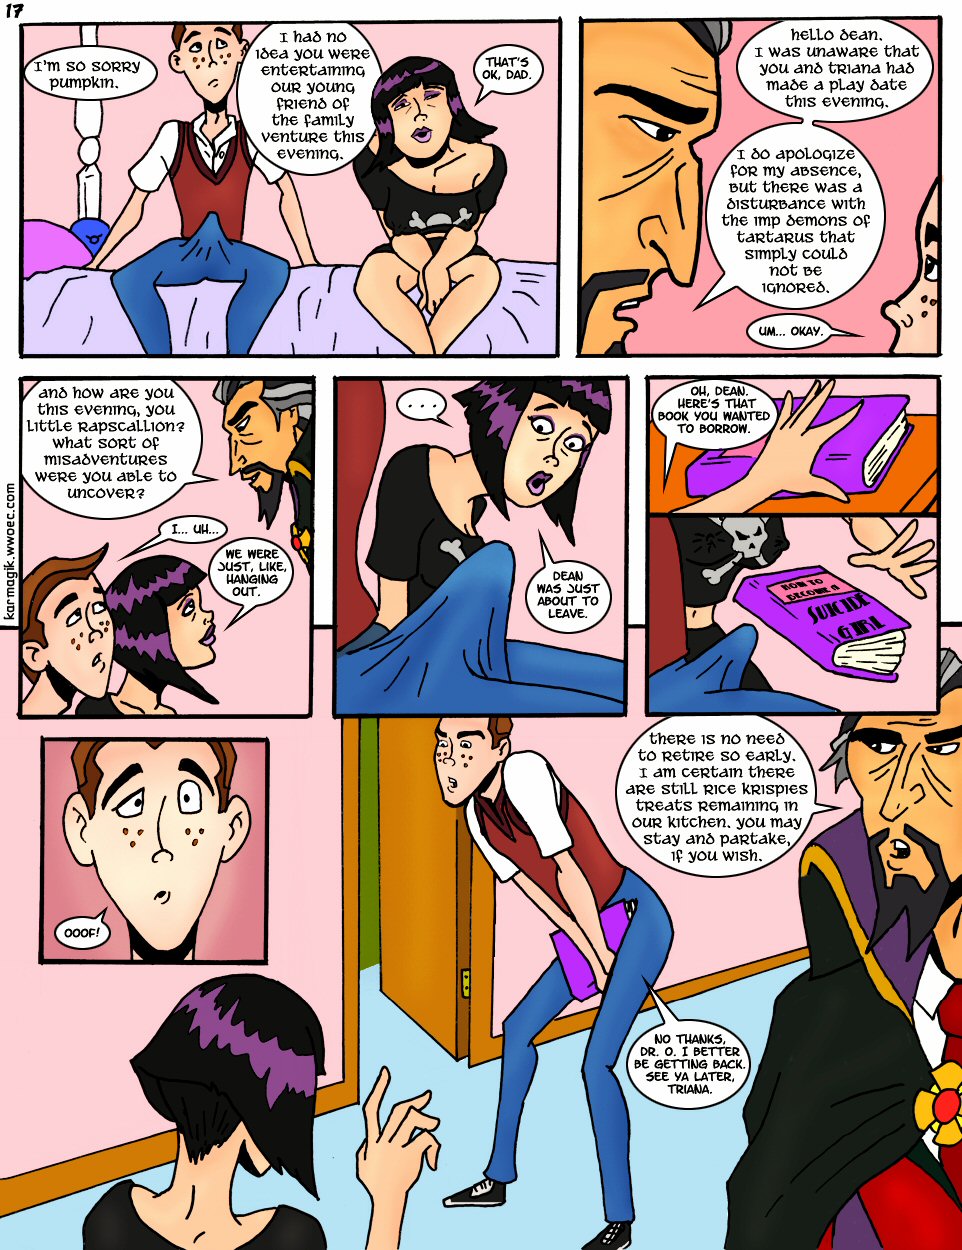 Karmagik Villainess Intentions (The Venture Bros) Full Color read online,free download